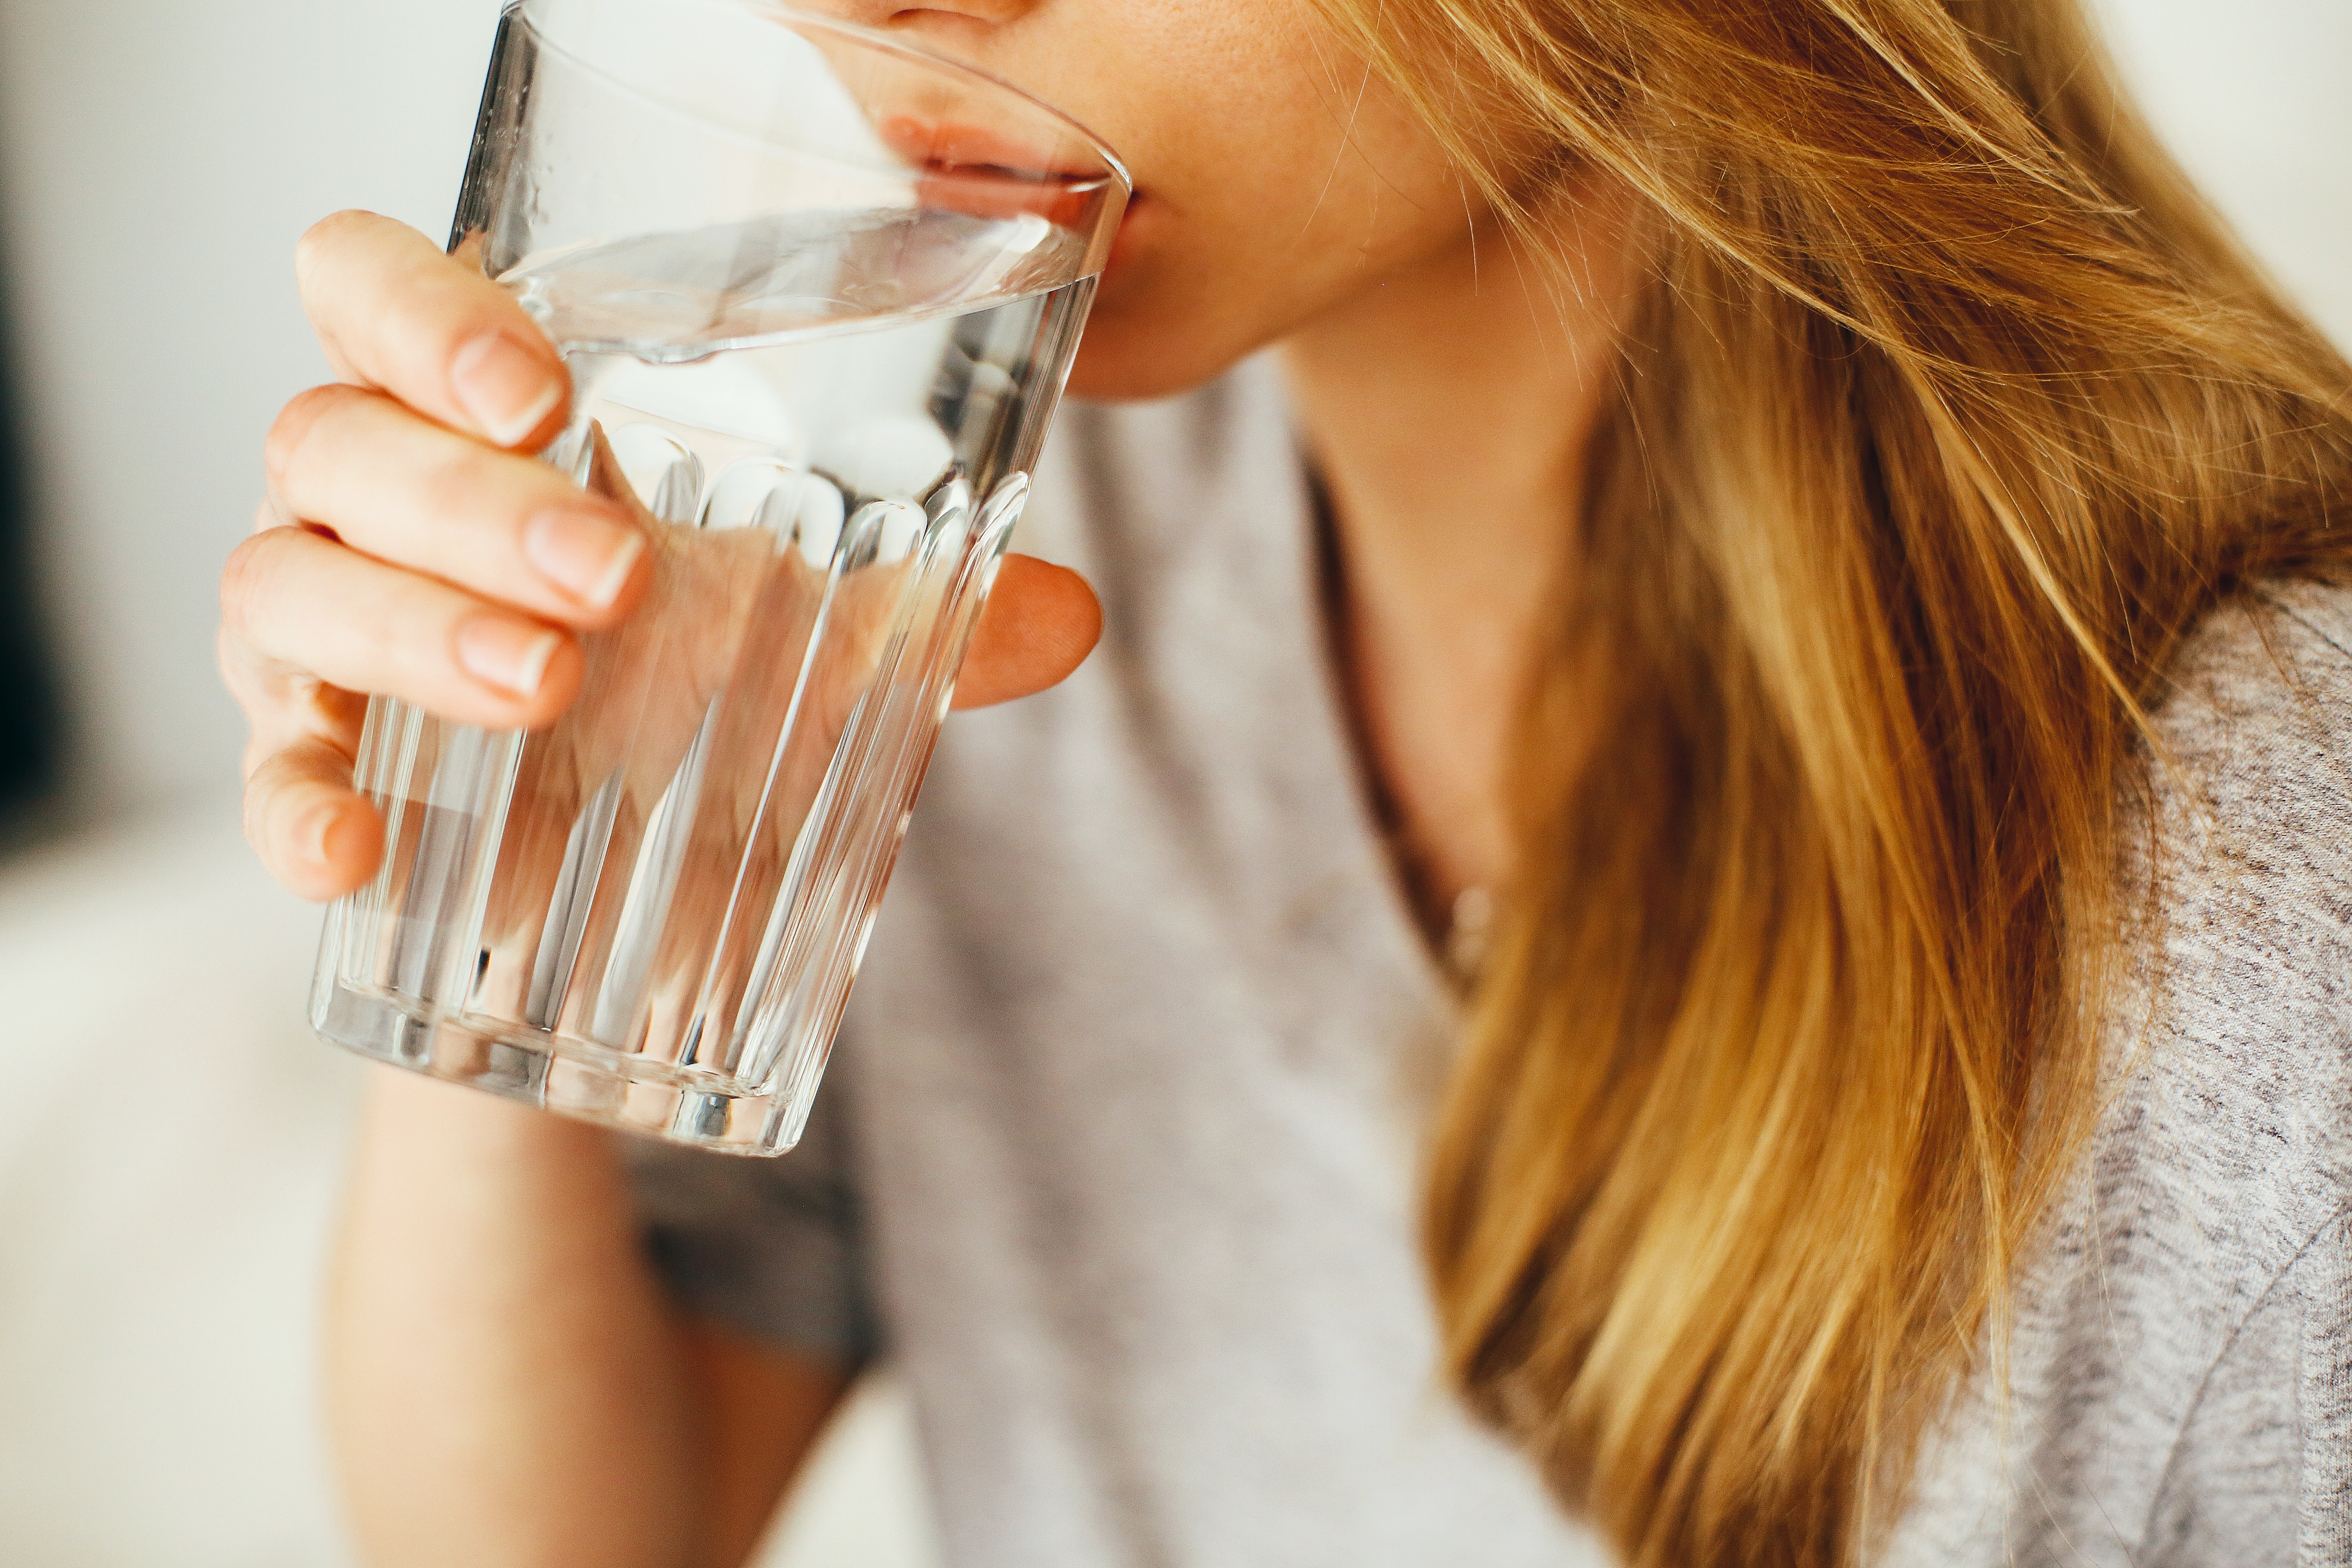 Symptoms of dry mouth can include feeling thirsty